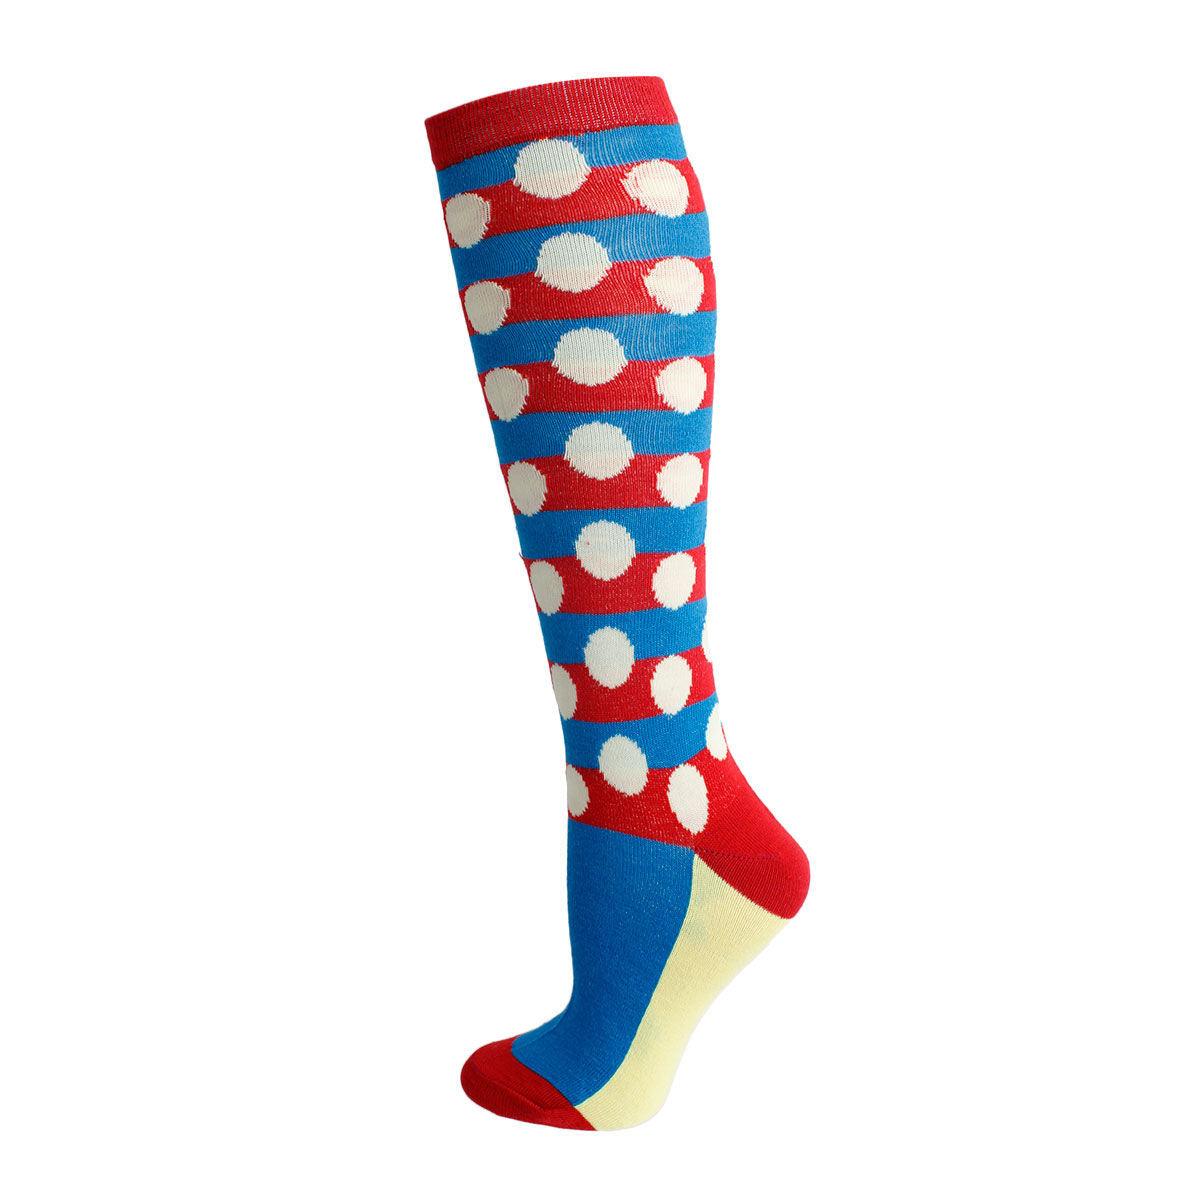 Cream Polka Dot Red Knee High Socks: The Perfect Addition to Your Wardrobe